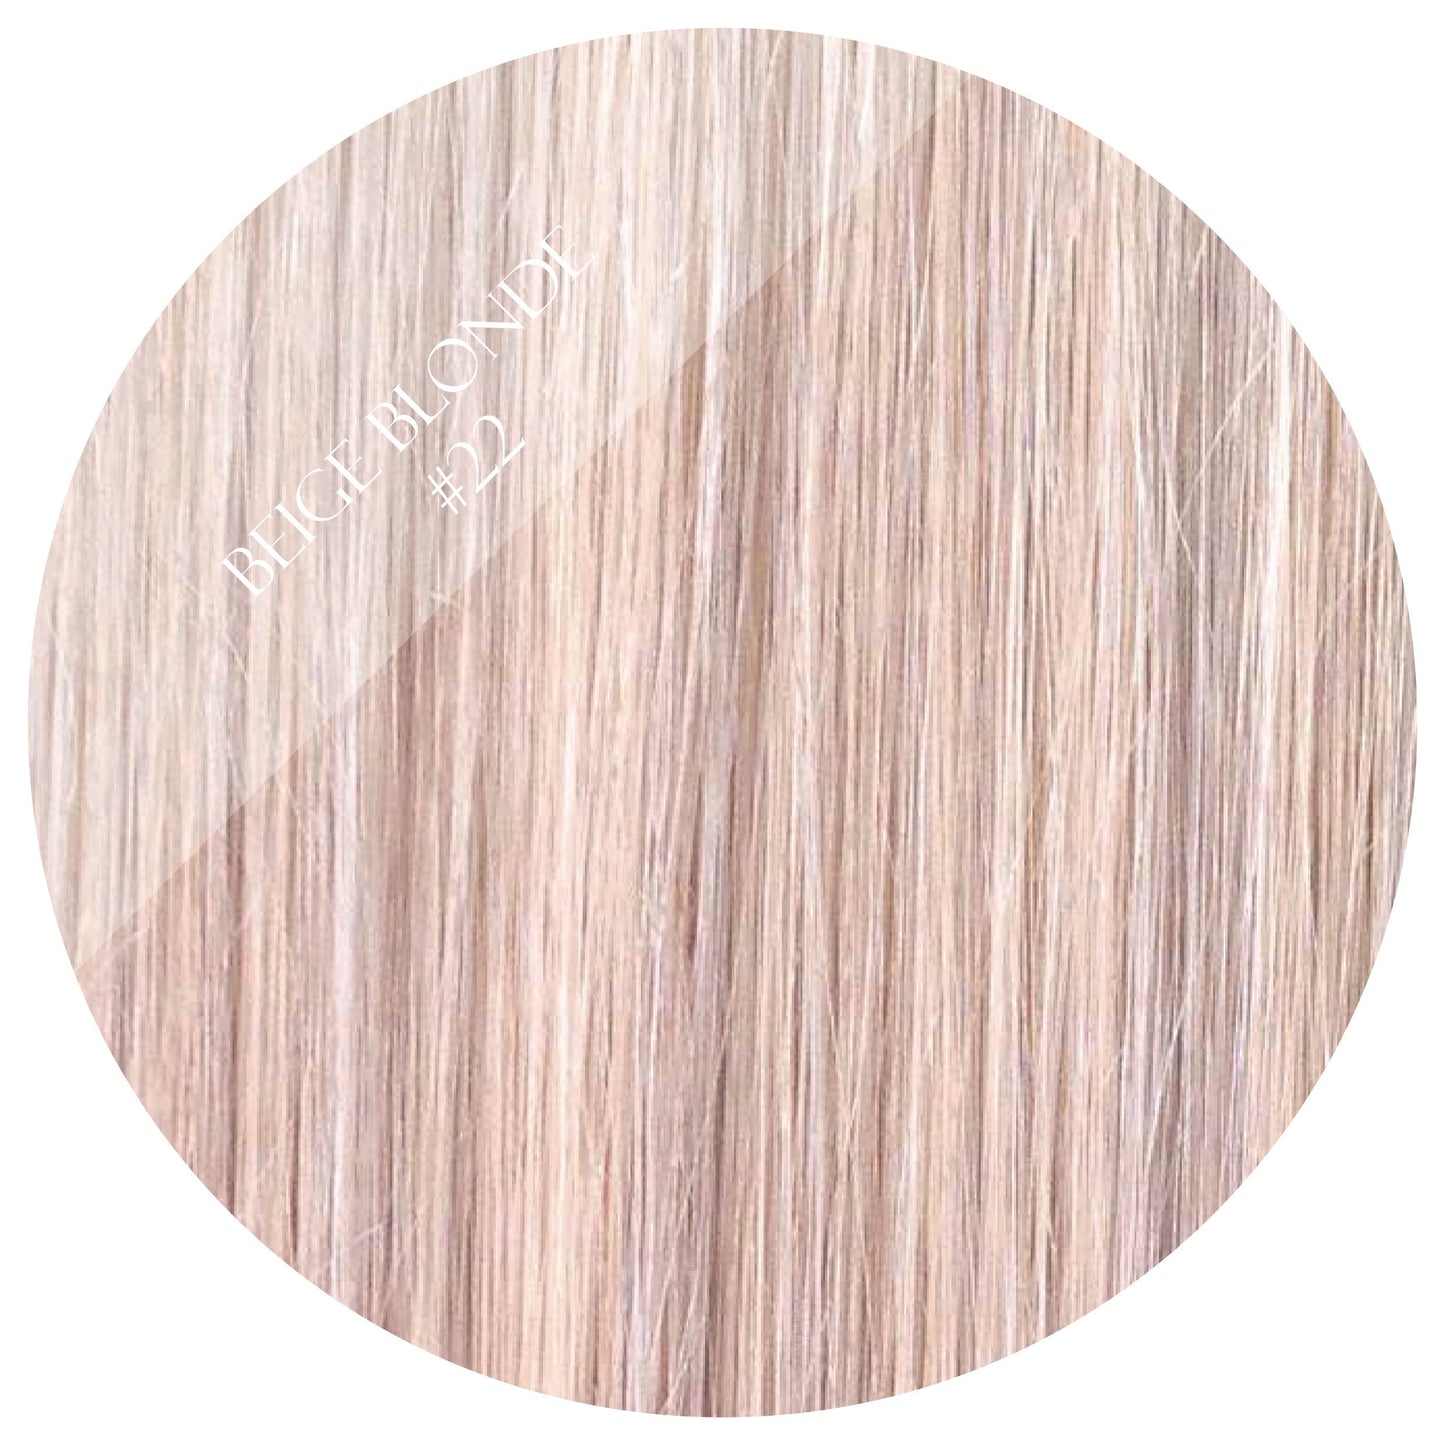 creme brulee blonde #22 weft hair extensions 20inch deluxe